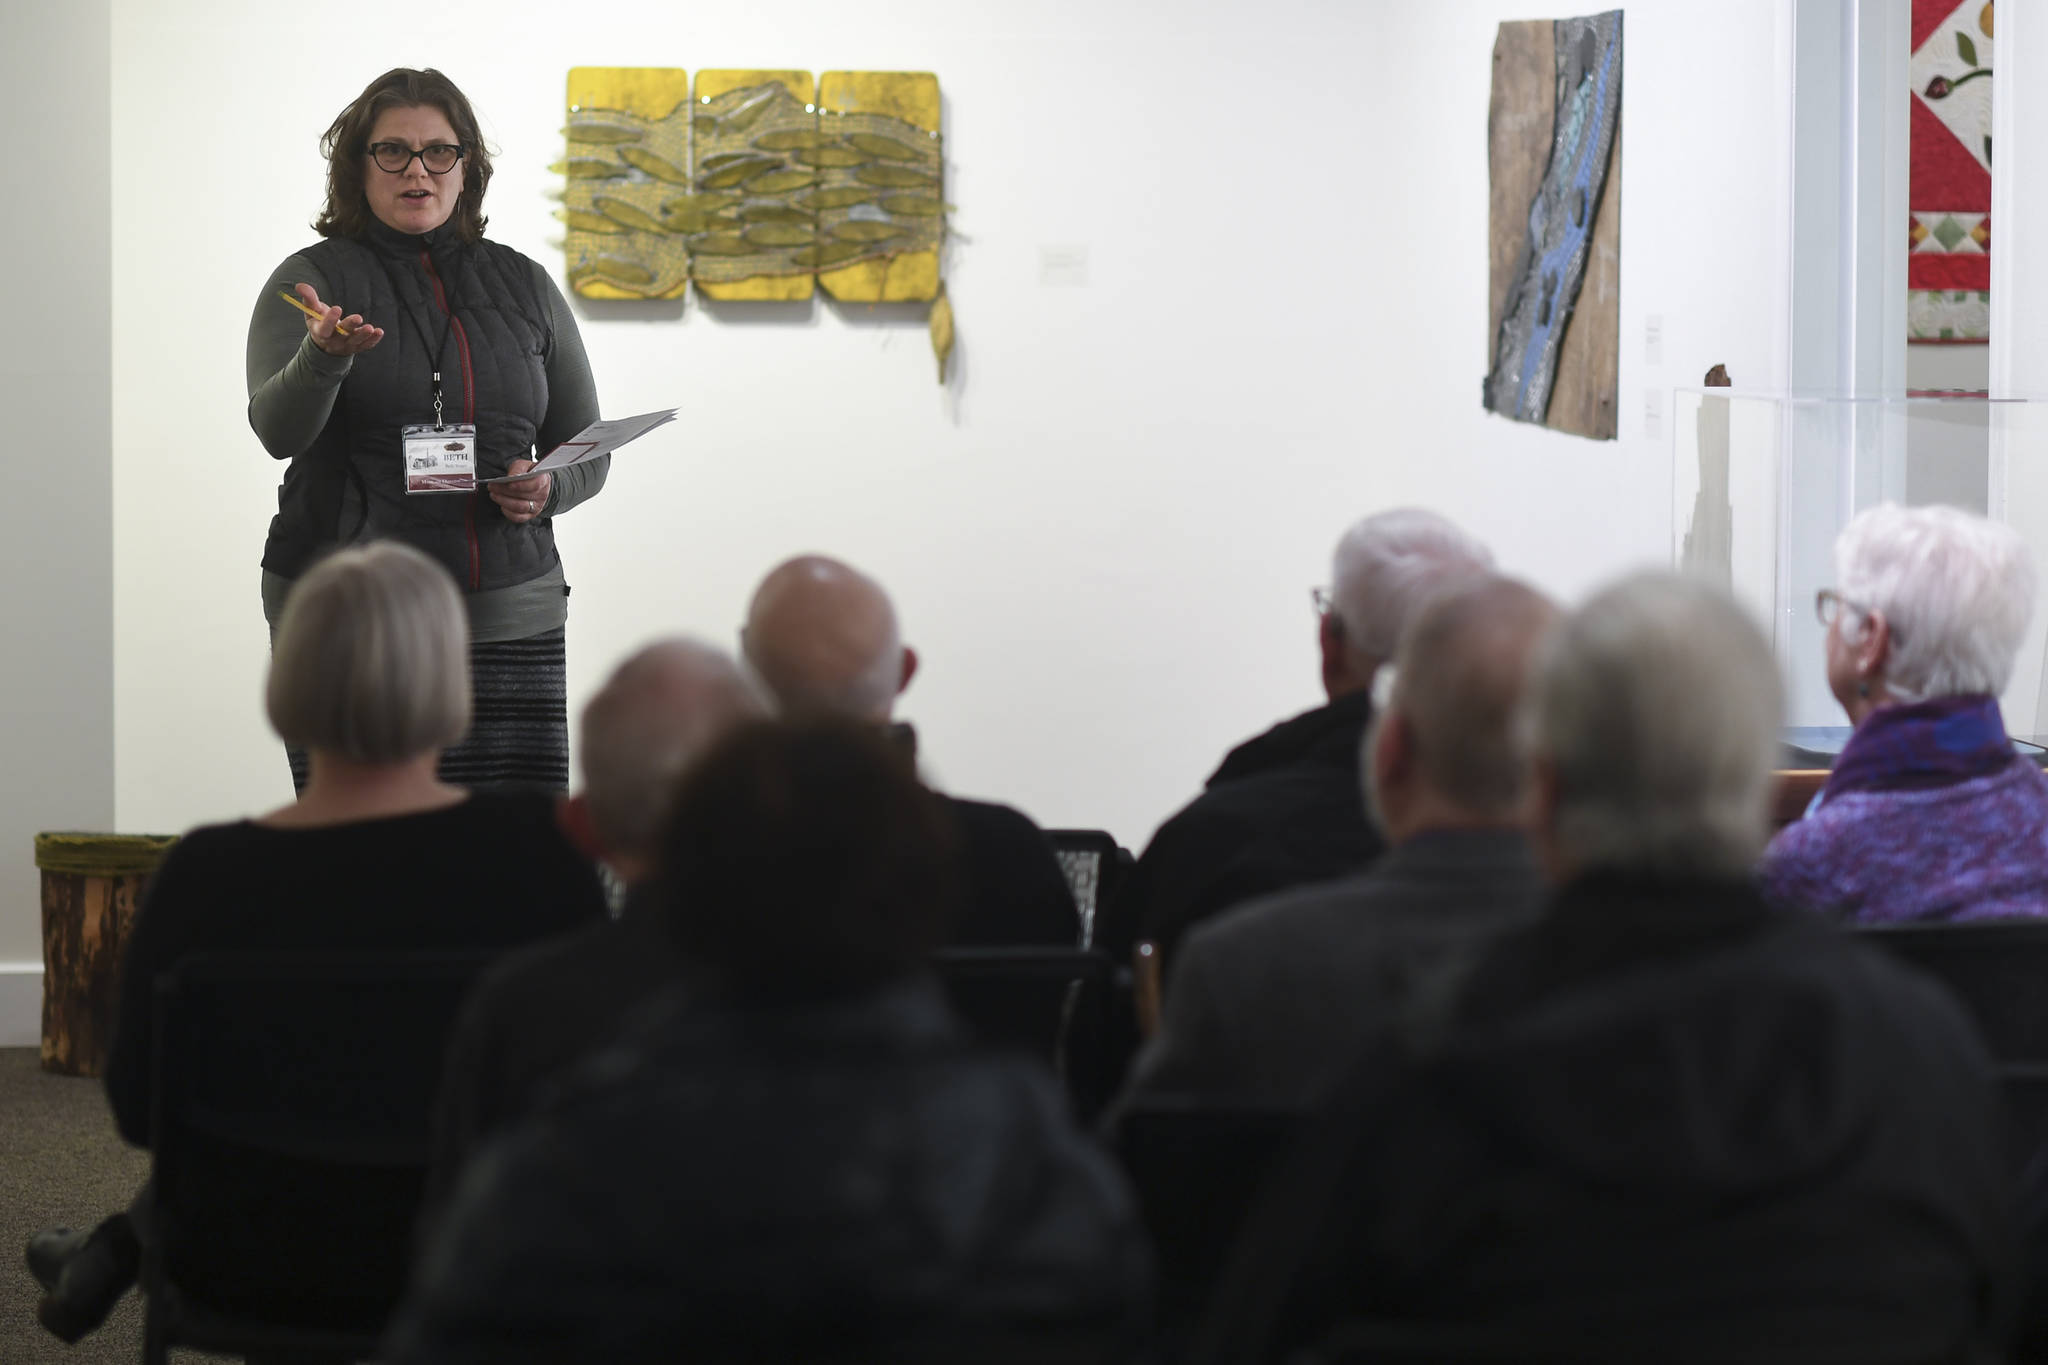 Beth Weigel, Director of the Juneau-Douglas City Museum, gives an overview of the newly announced Marie Darlin Prize during a meeting of the Friends of the Juneau-Douglas City Museum on Thursday, Nov. 7, 2019. (Michael Penn | Juneau Empire)